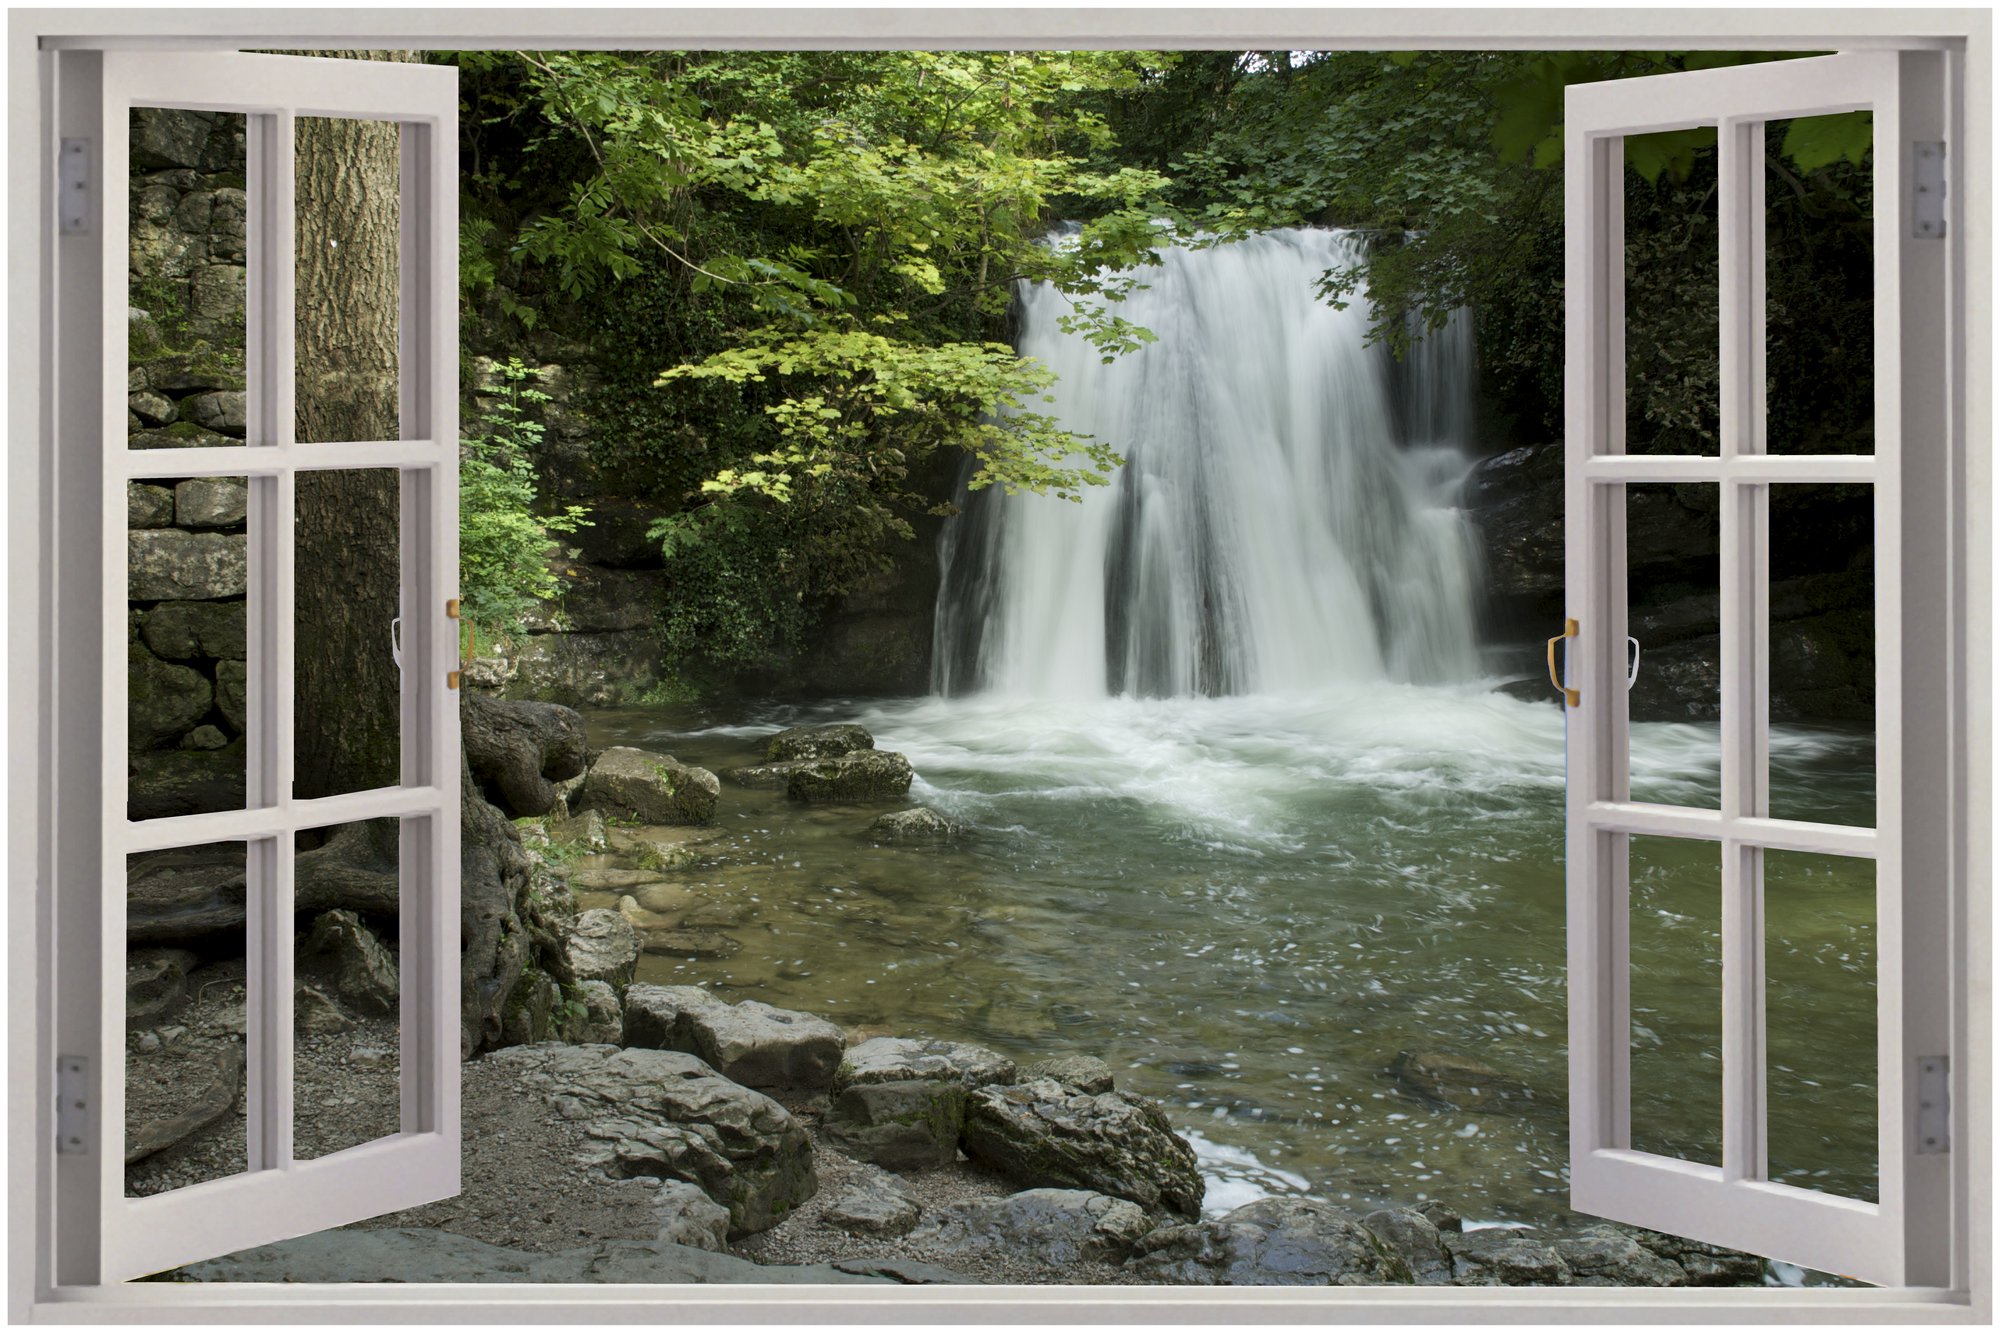 Waterfall View 3D window wallpaper Decals Home Decor Mural Wall Stickers W87